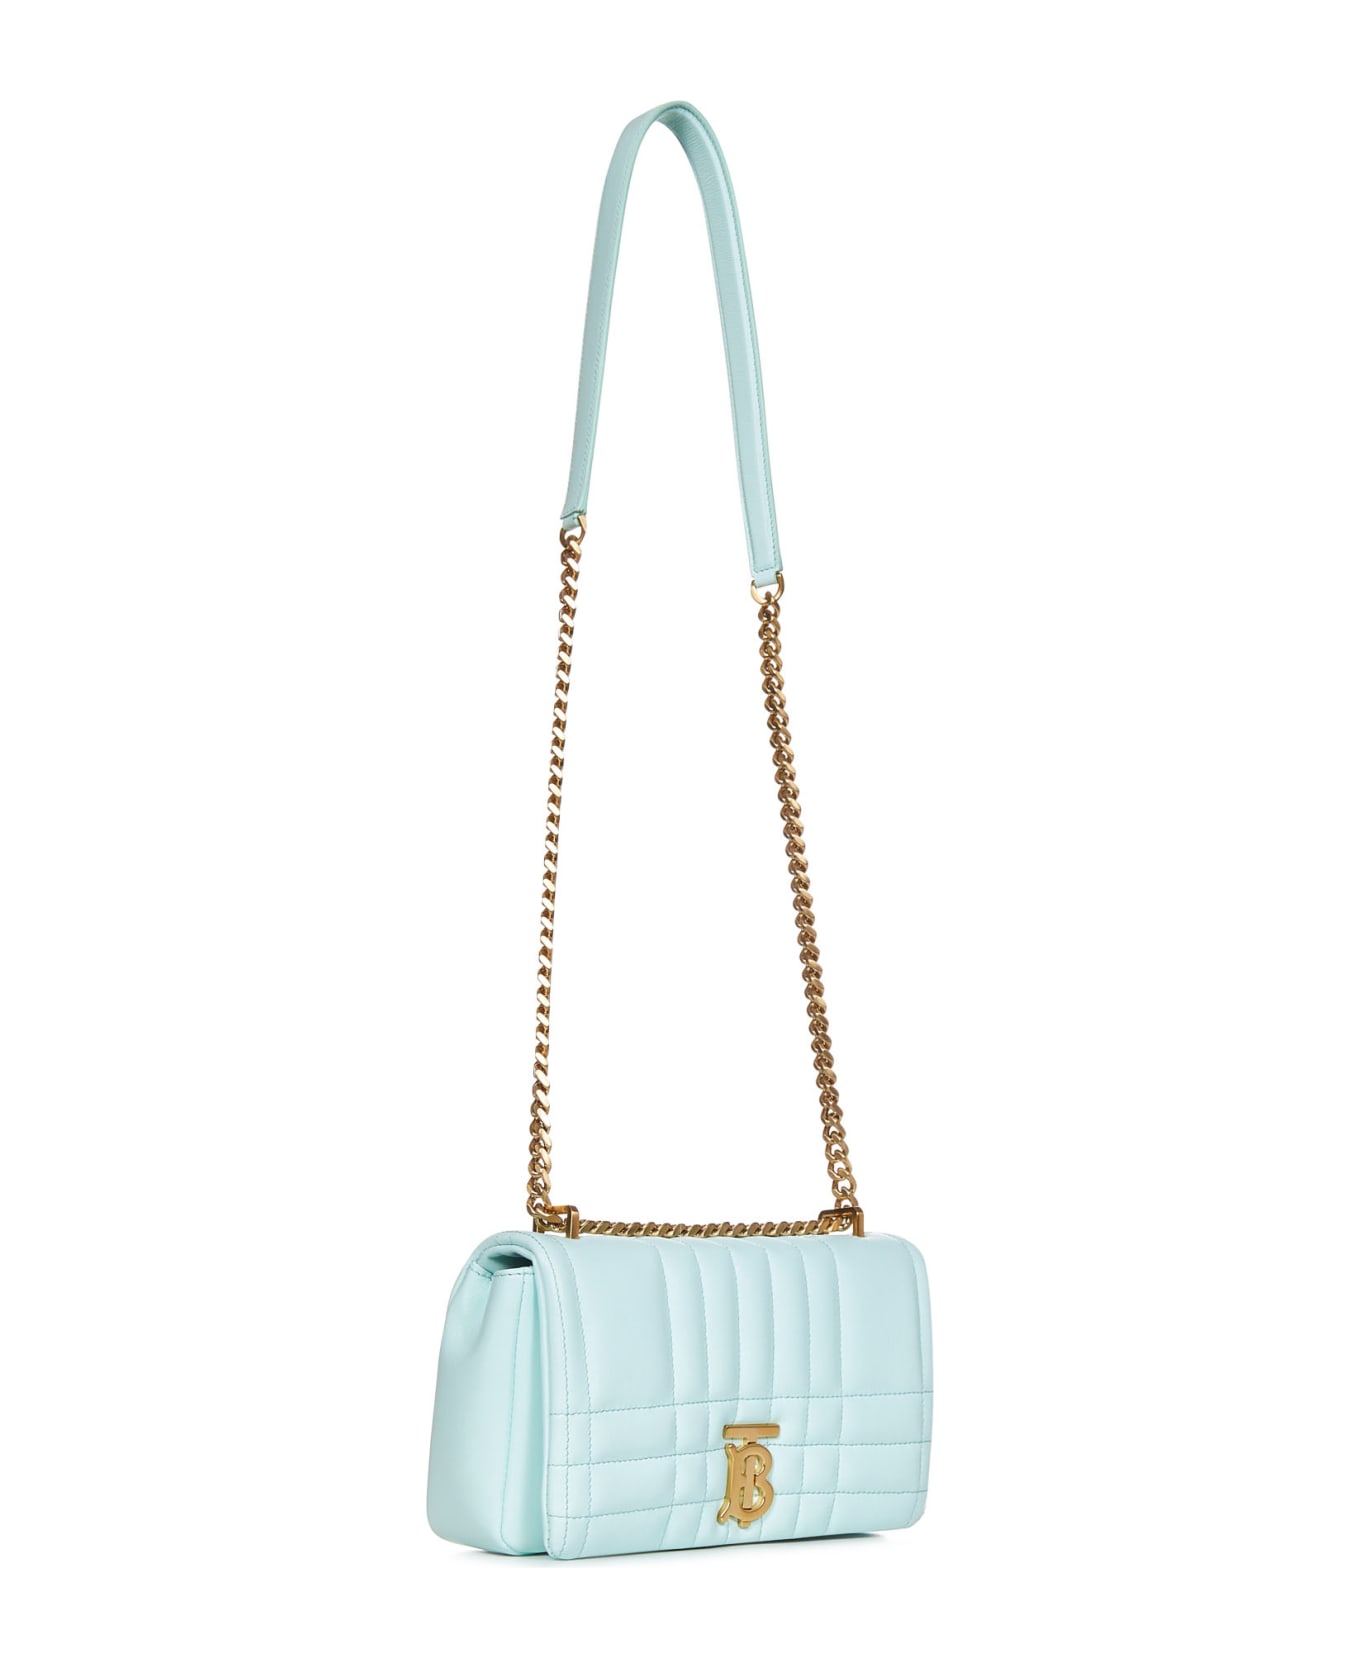 Burberry Lola Small Shoulder Bag - Clear Blue